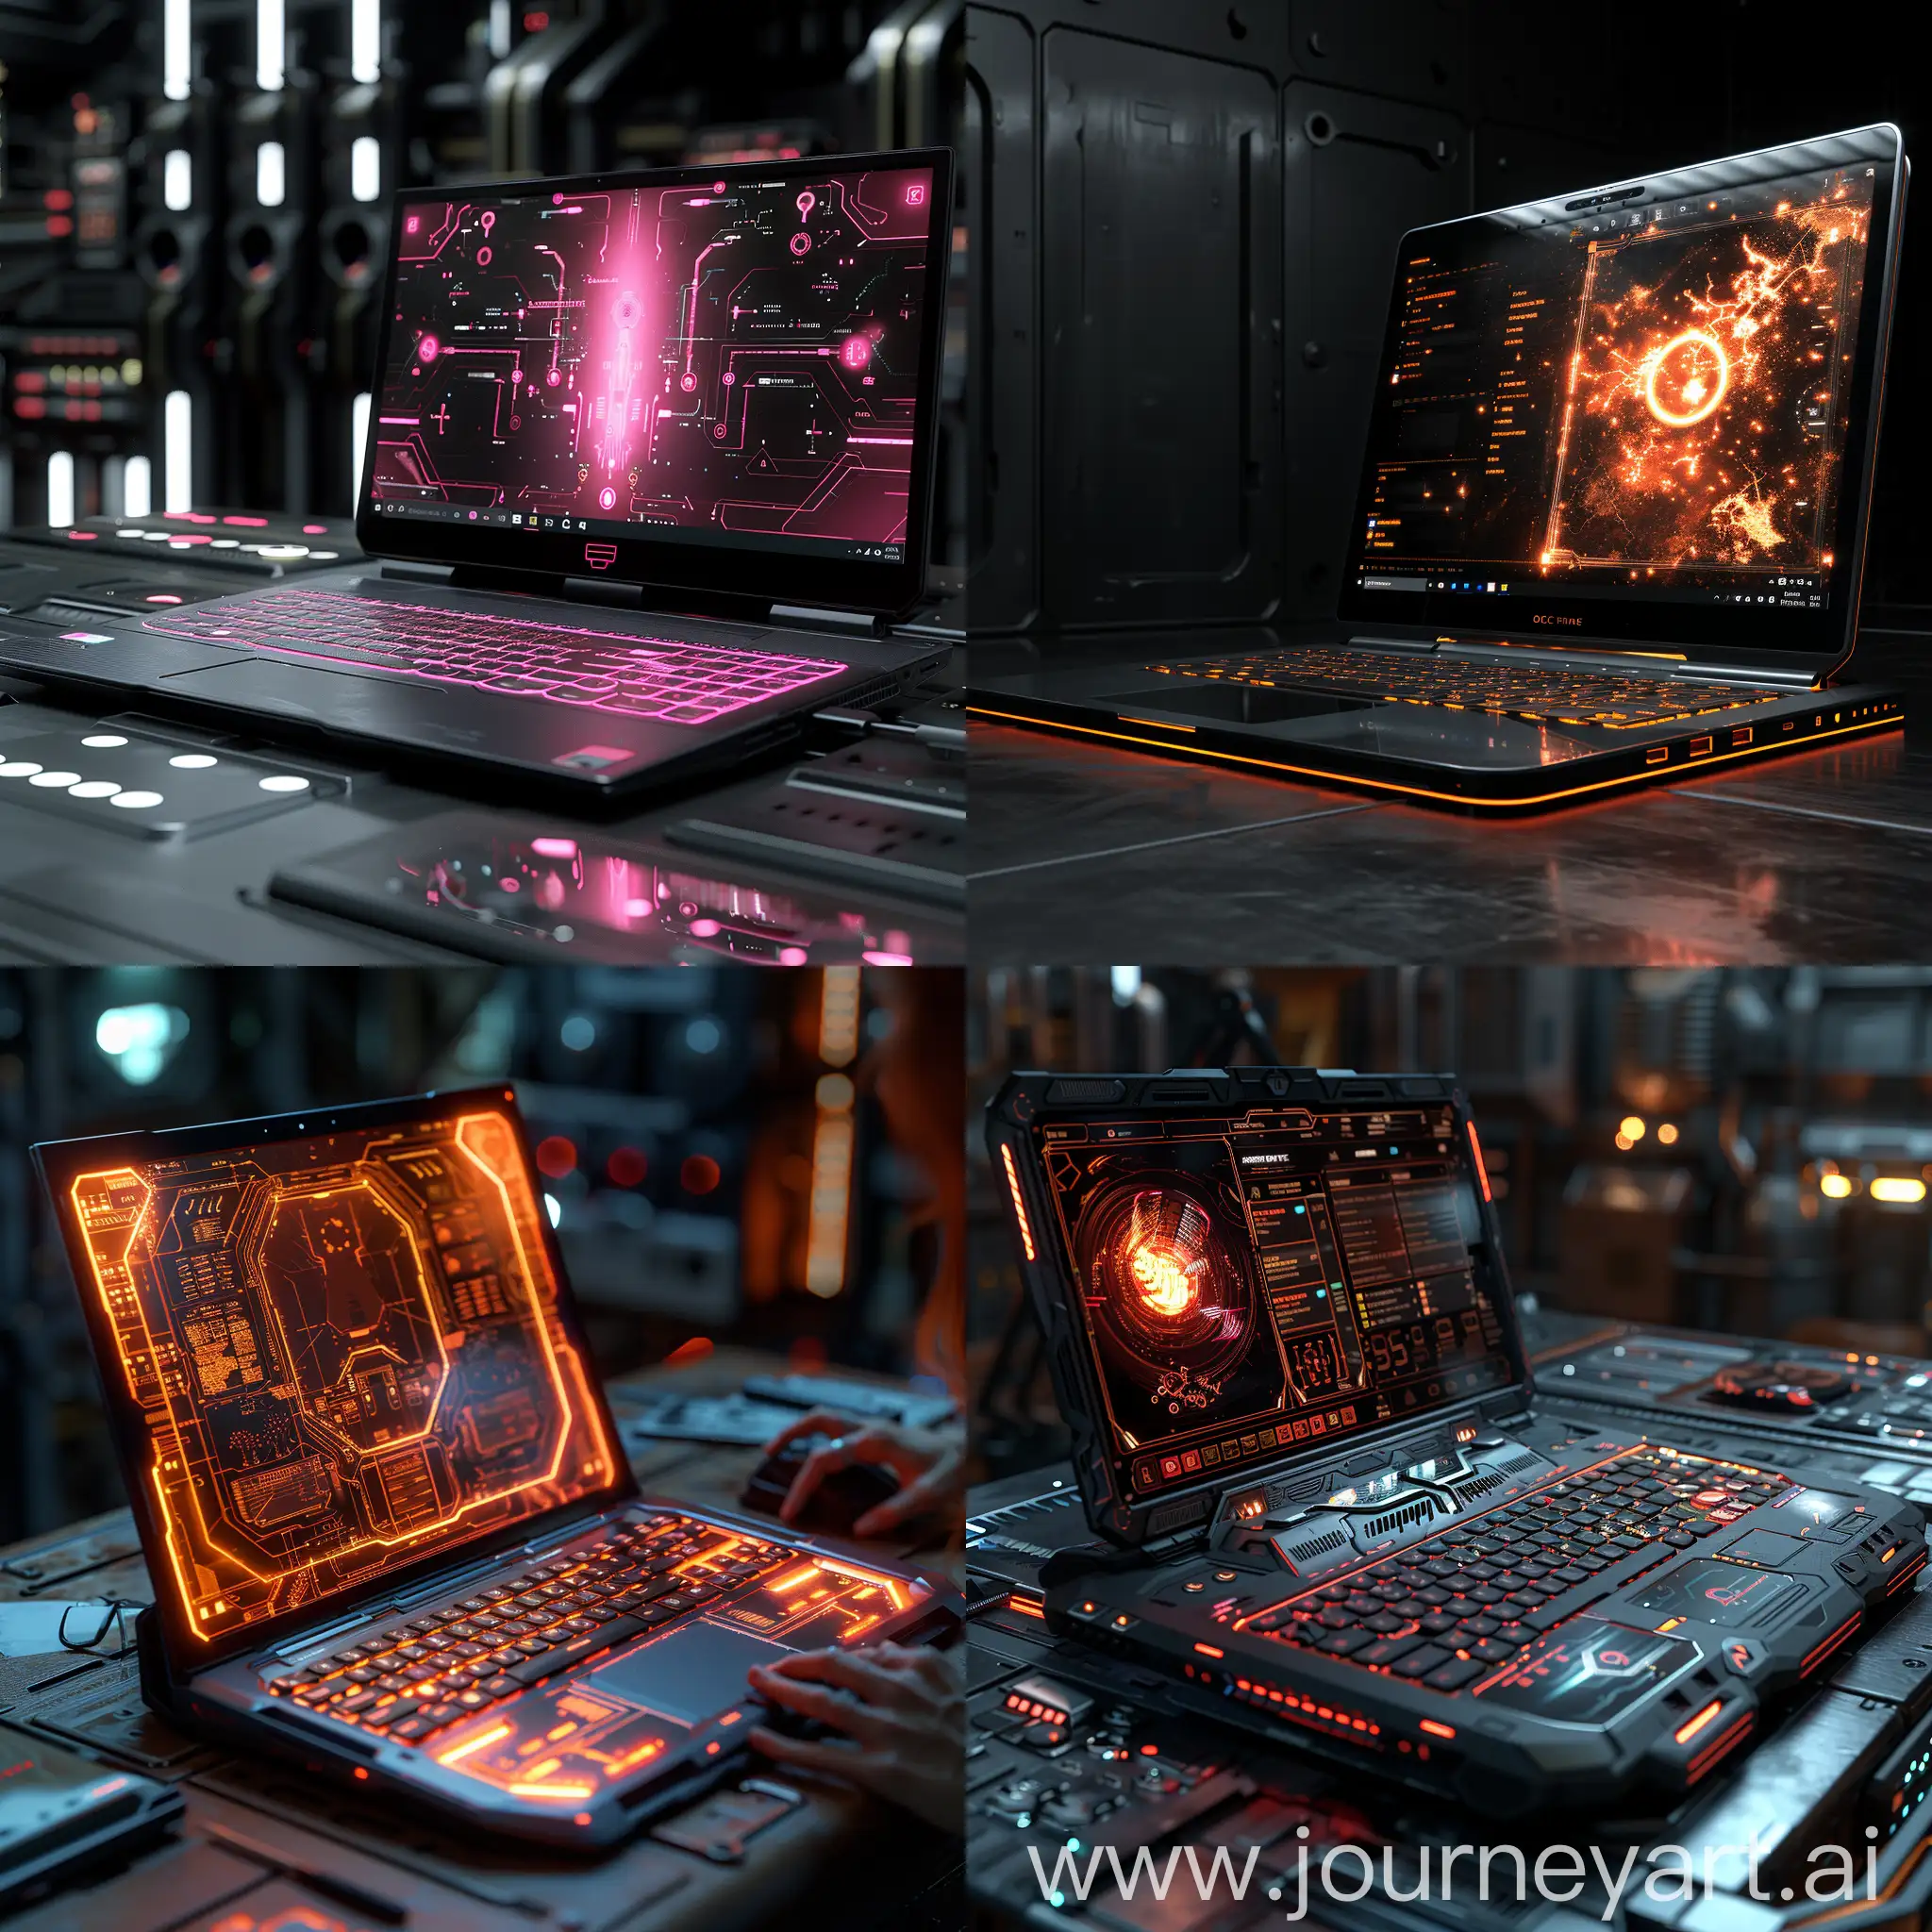 Futuristic-Laptop-with-Holographic-Display-and-Biometric-Security